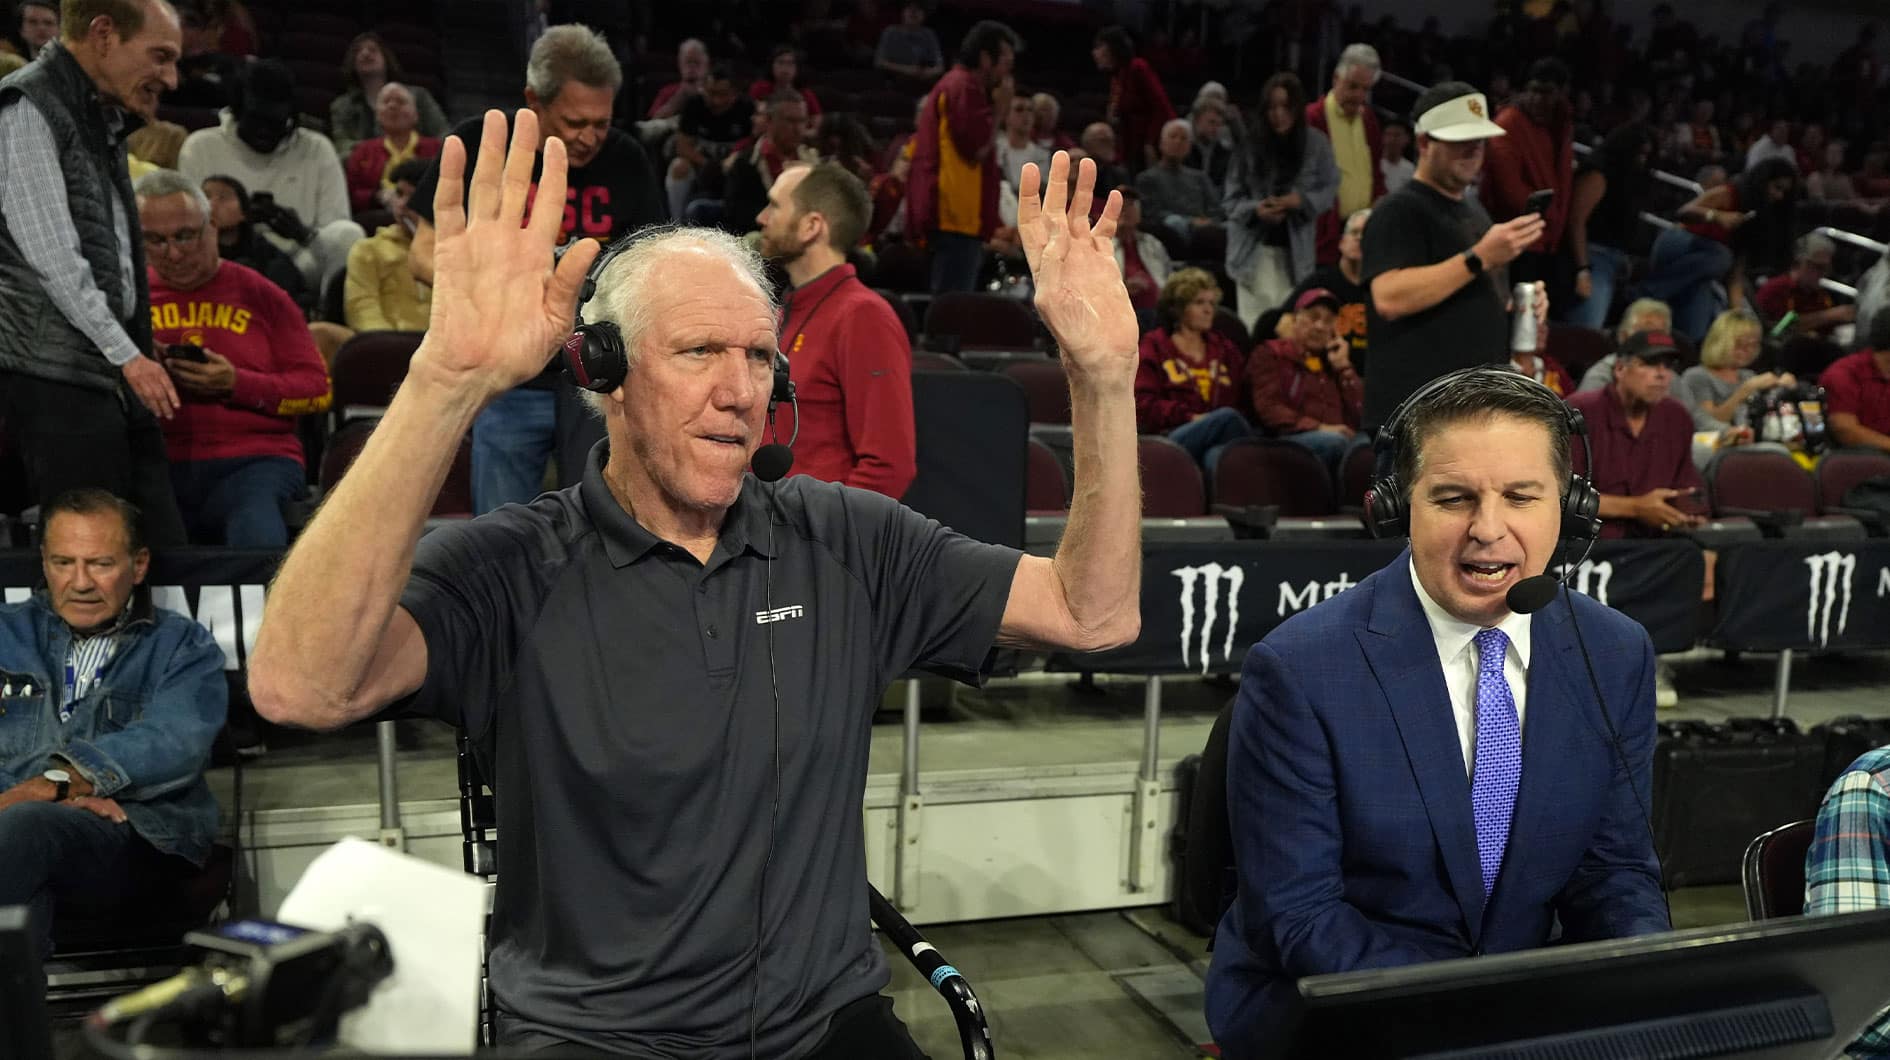 Pac-12 Networks analyst Bill Walton (left) and play-by-play announcer Roxy Bernstein during the game between the Southern California Trojans and the UCLA Bruins at the Galen Center.